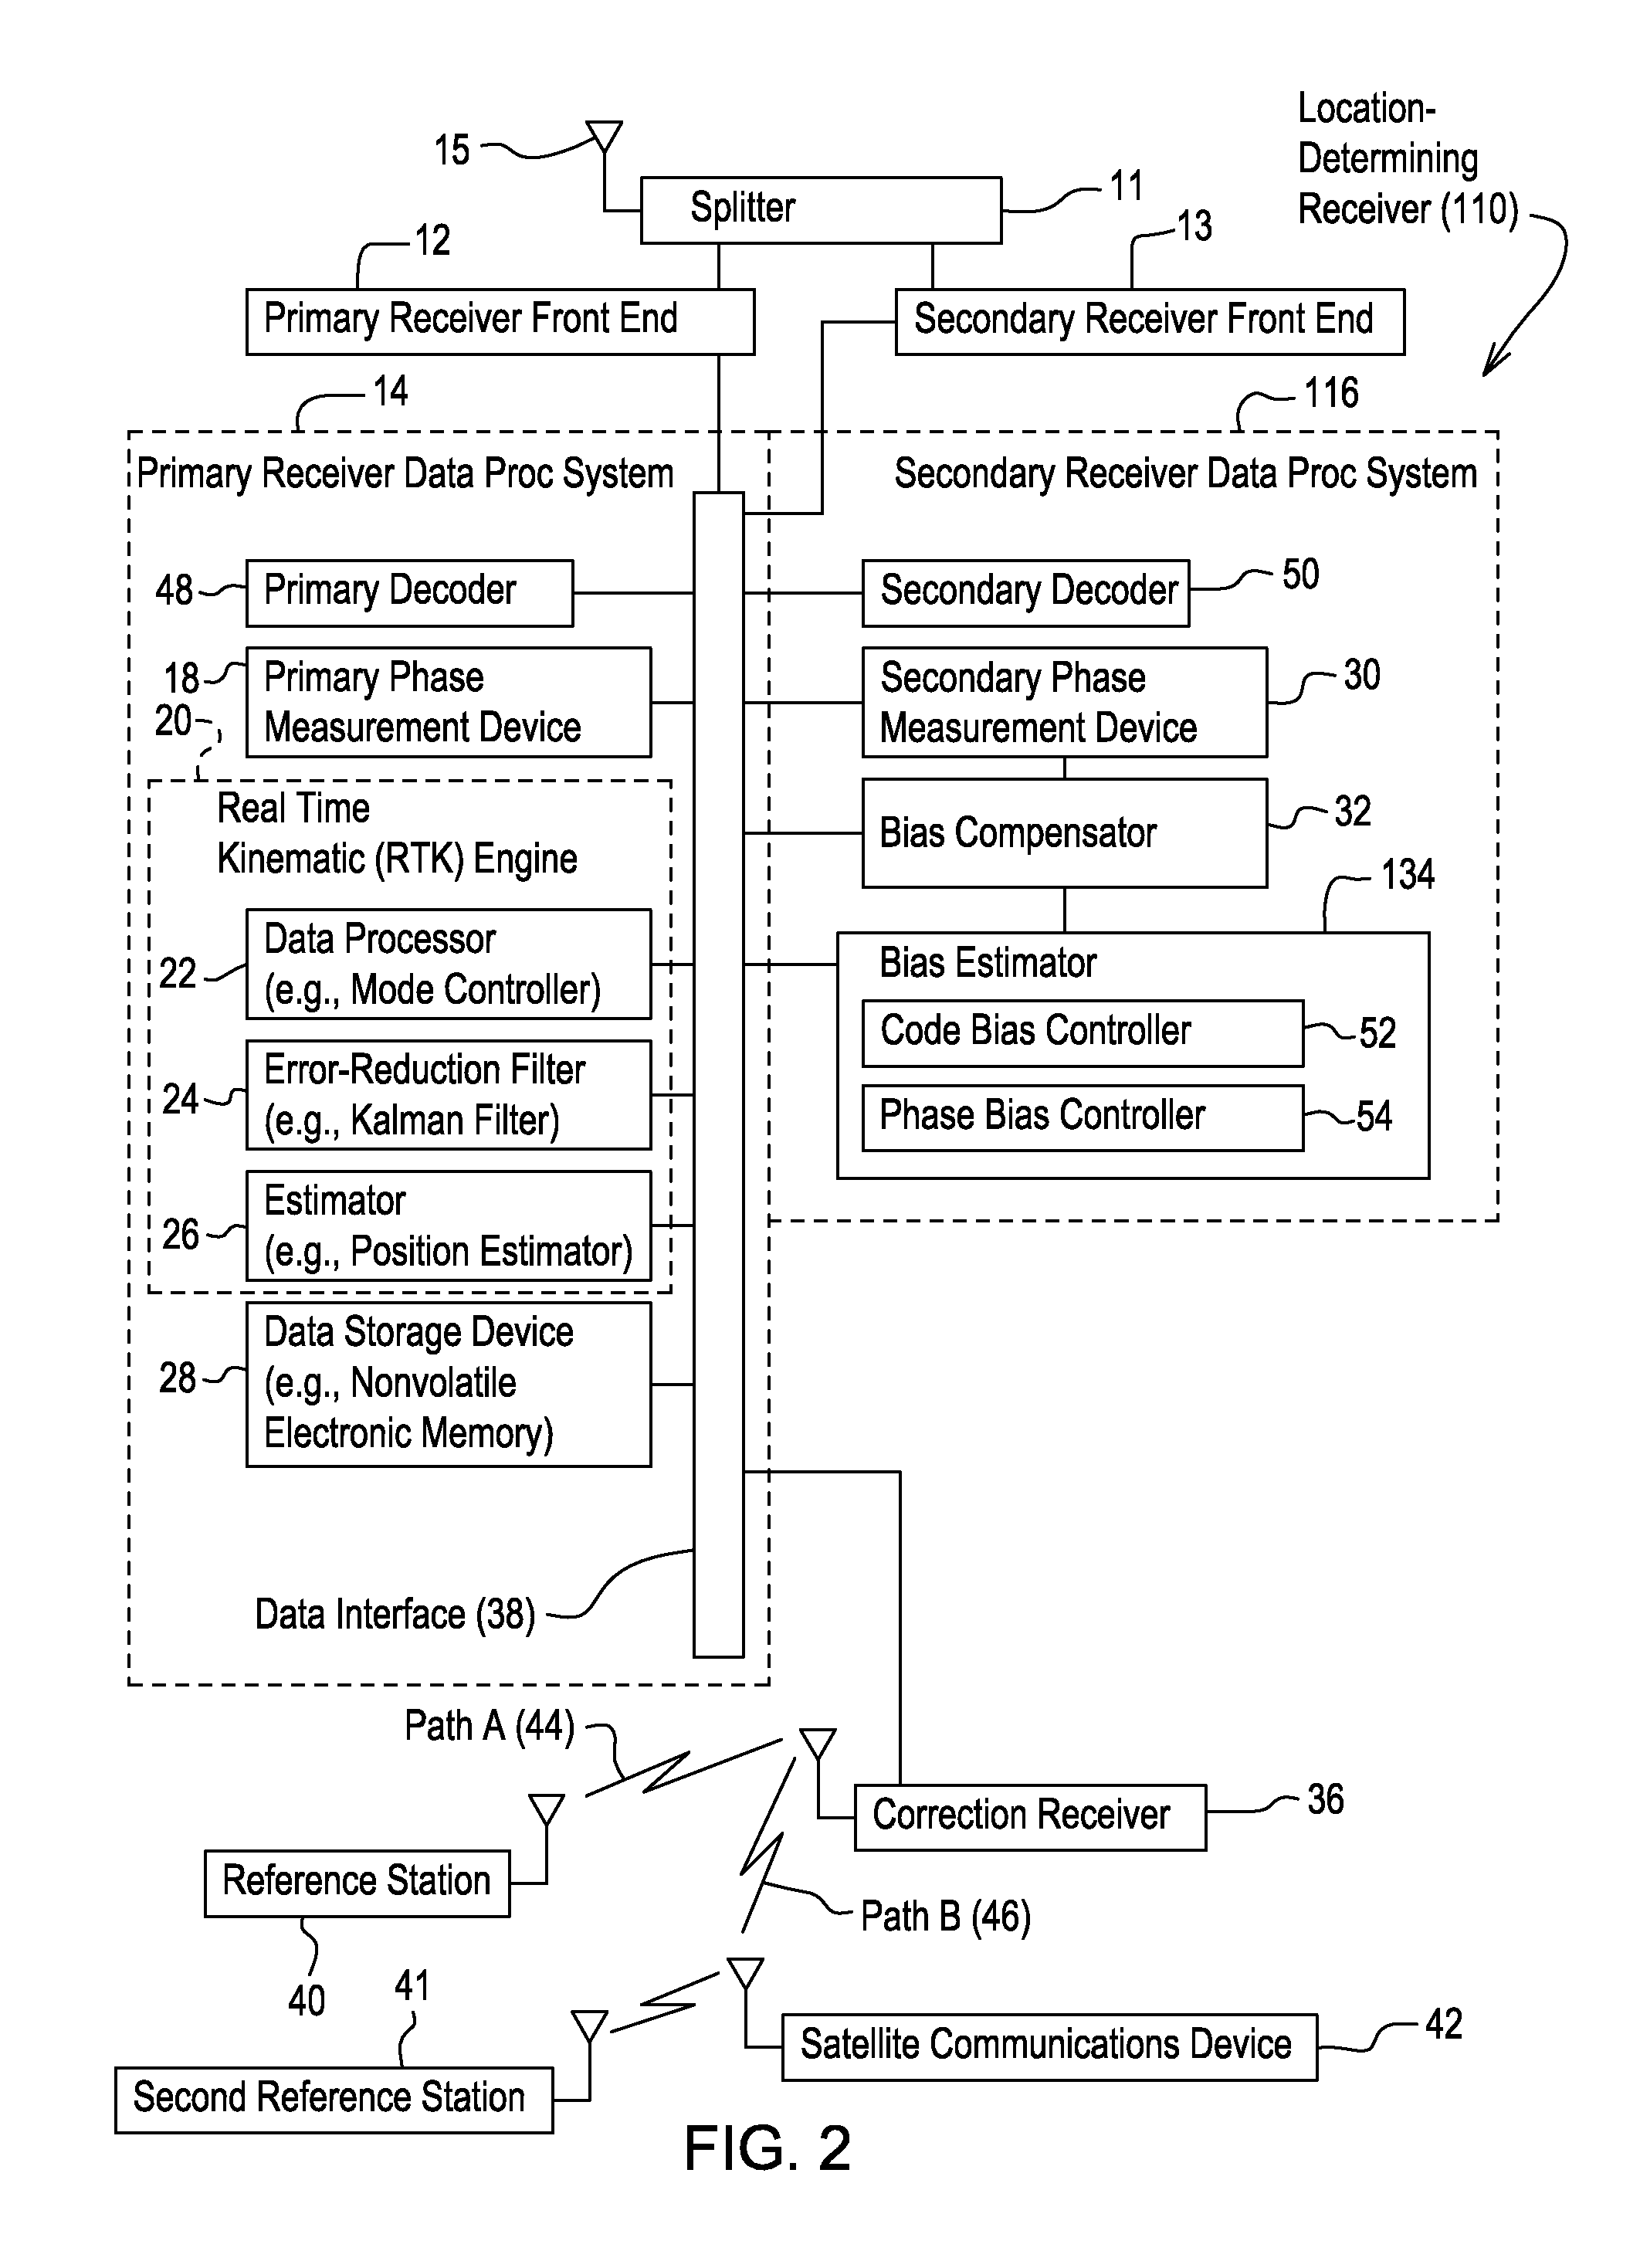 Method and system for estimating position with bias compensation